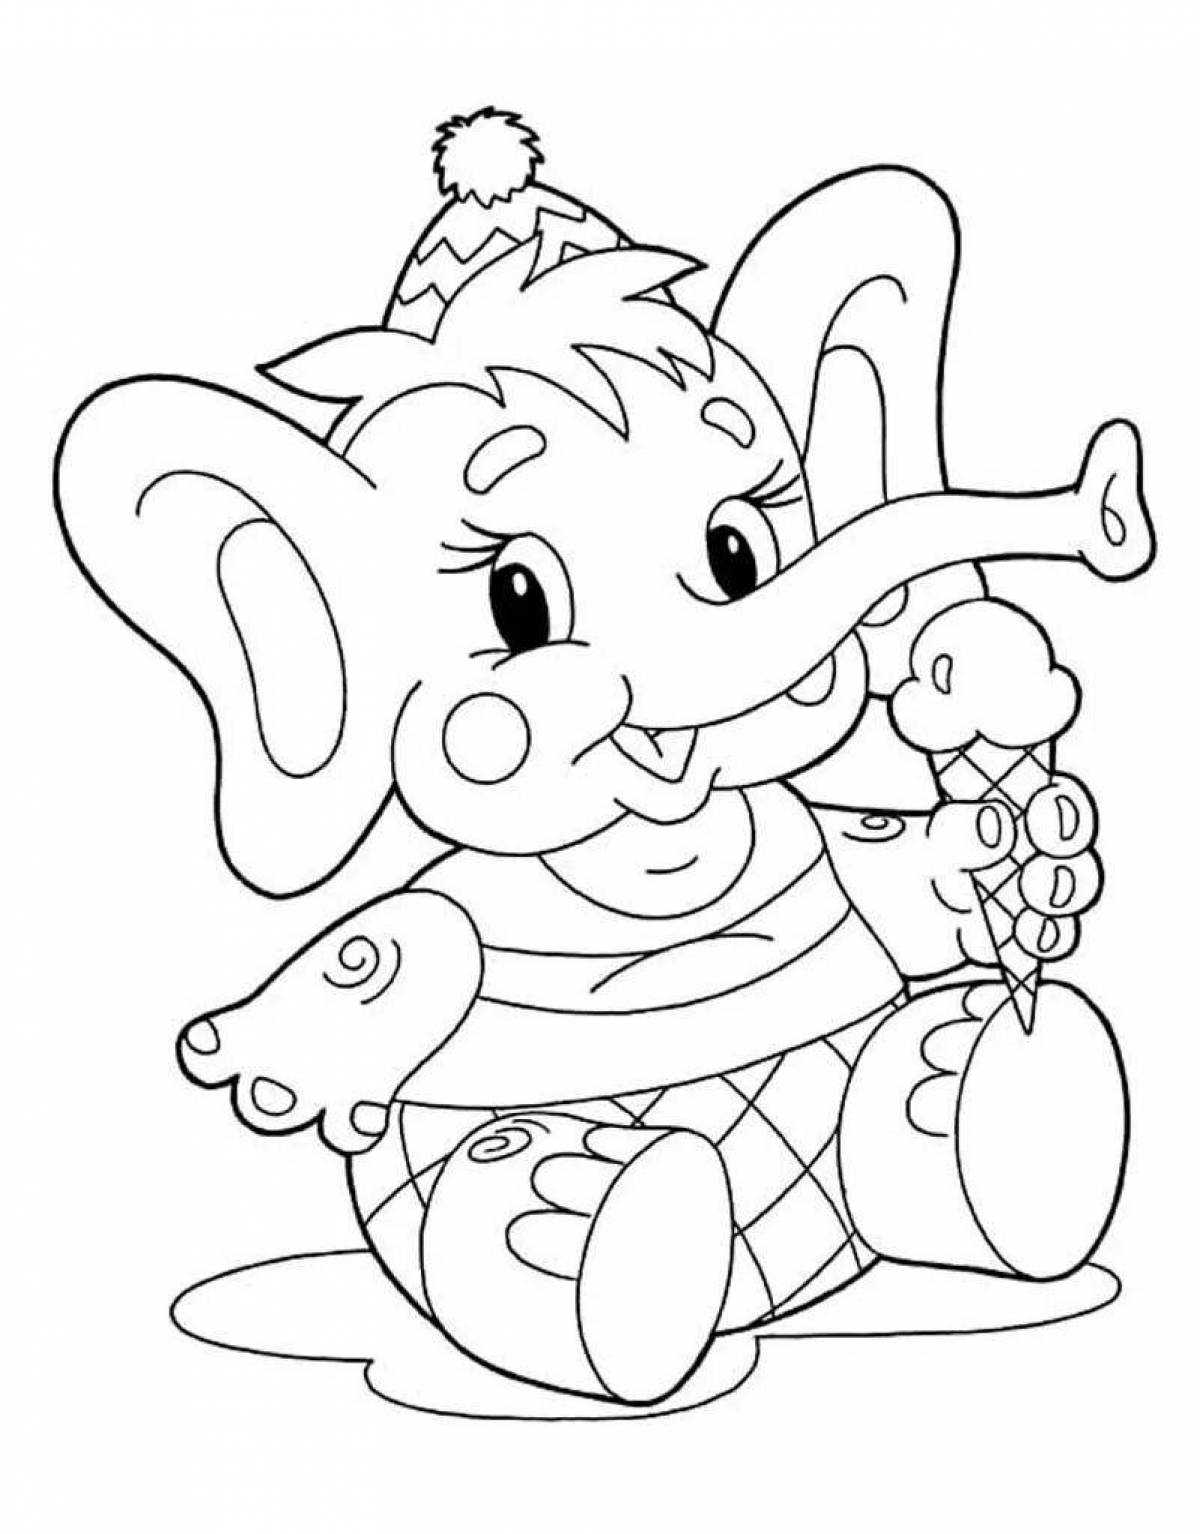 Funny animal coloring pages for kids